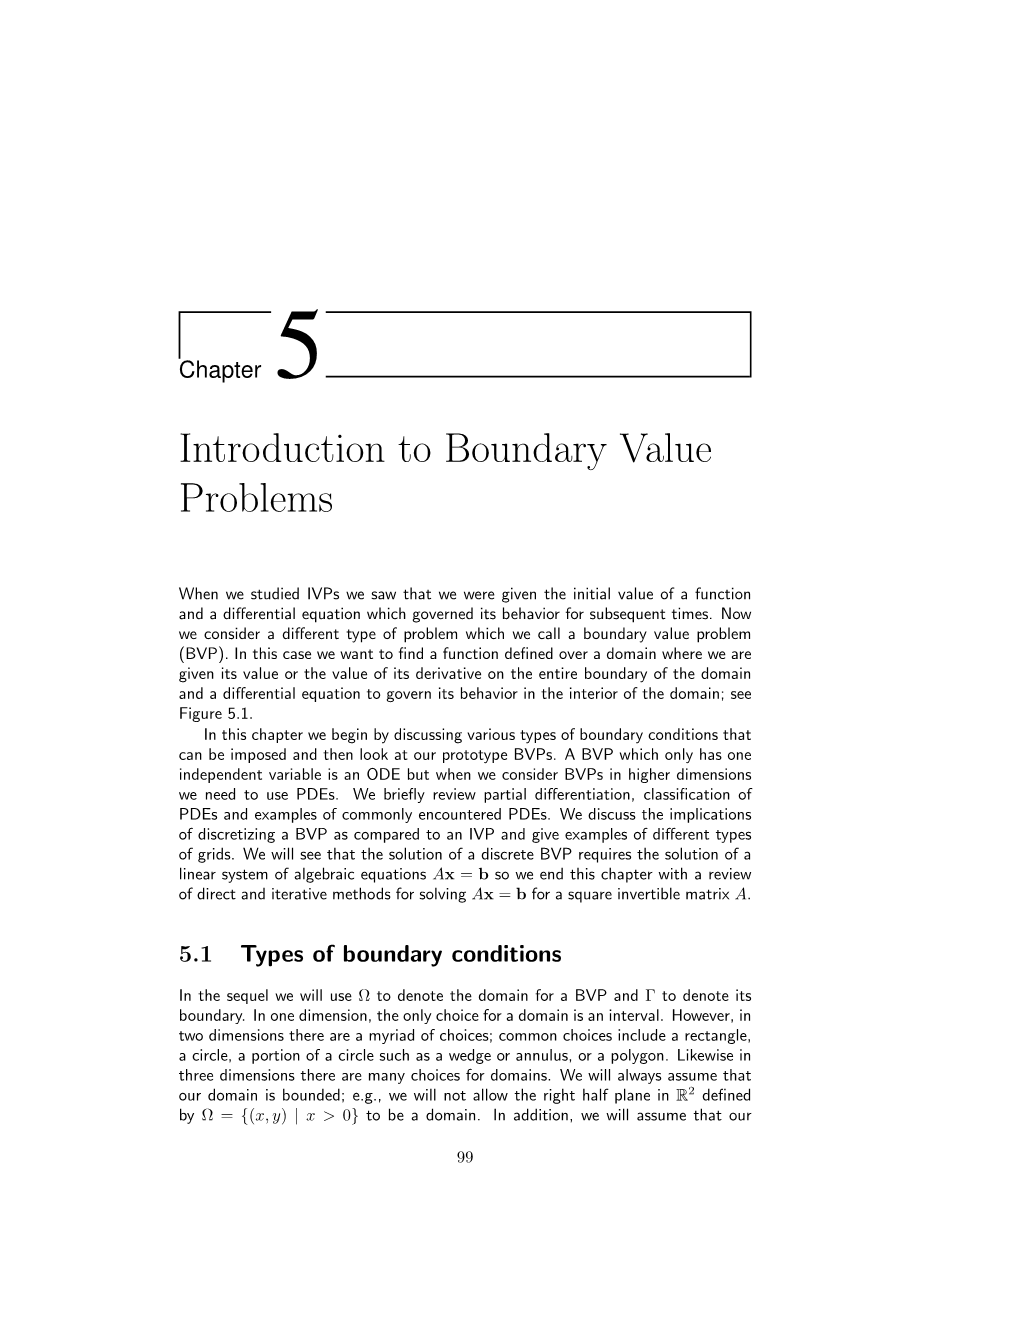 Introduction to Boundary Value Problems